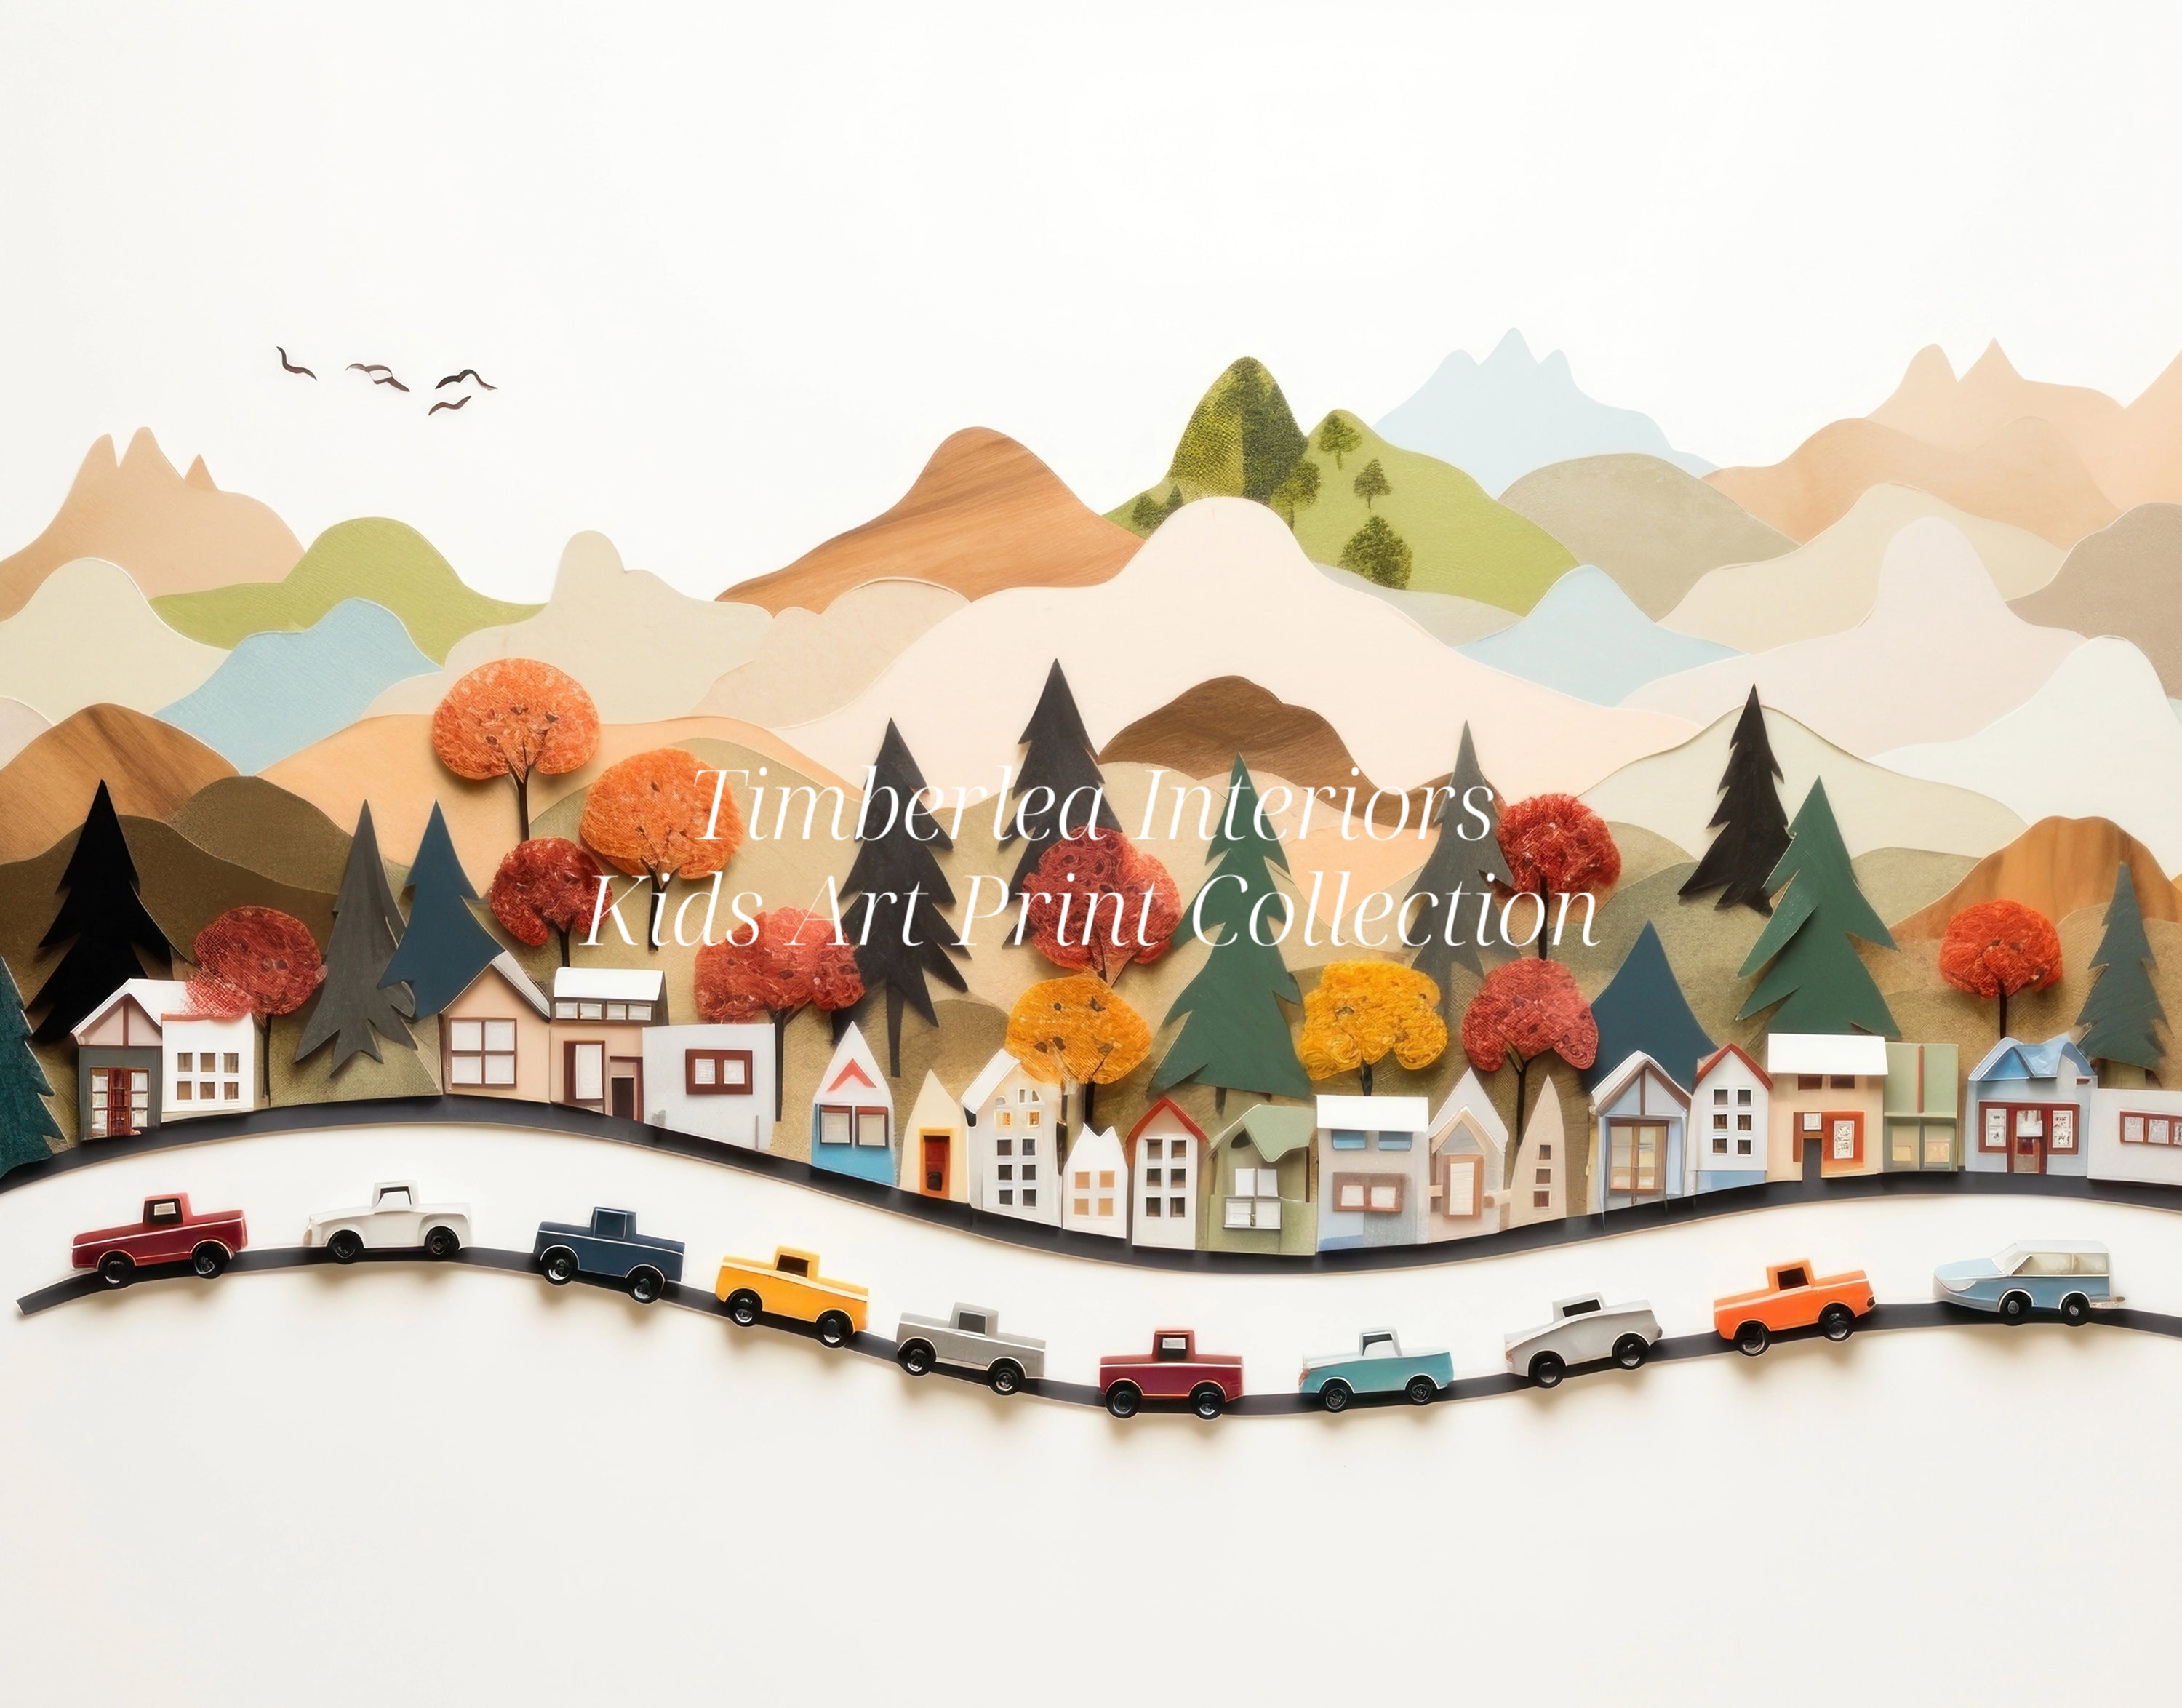 A detailed close-up of an art print illustrating a quaint village with vibrant cars traveling on a meandering road. The scene includes houses, trees, and distant mountains, highlighting the intricate textures and colors.